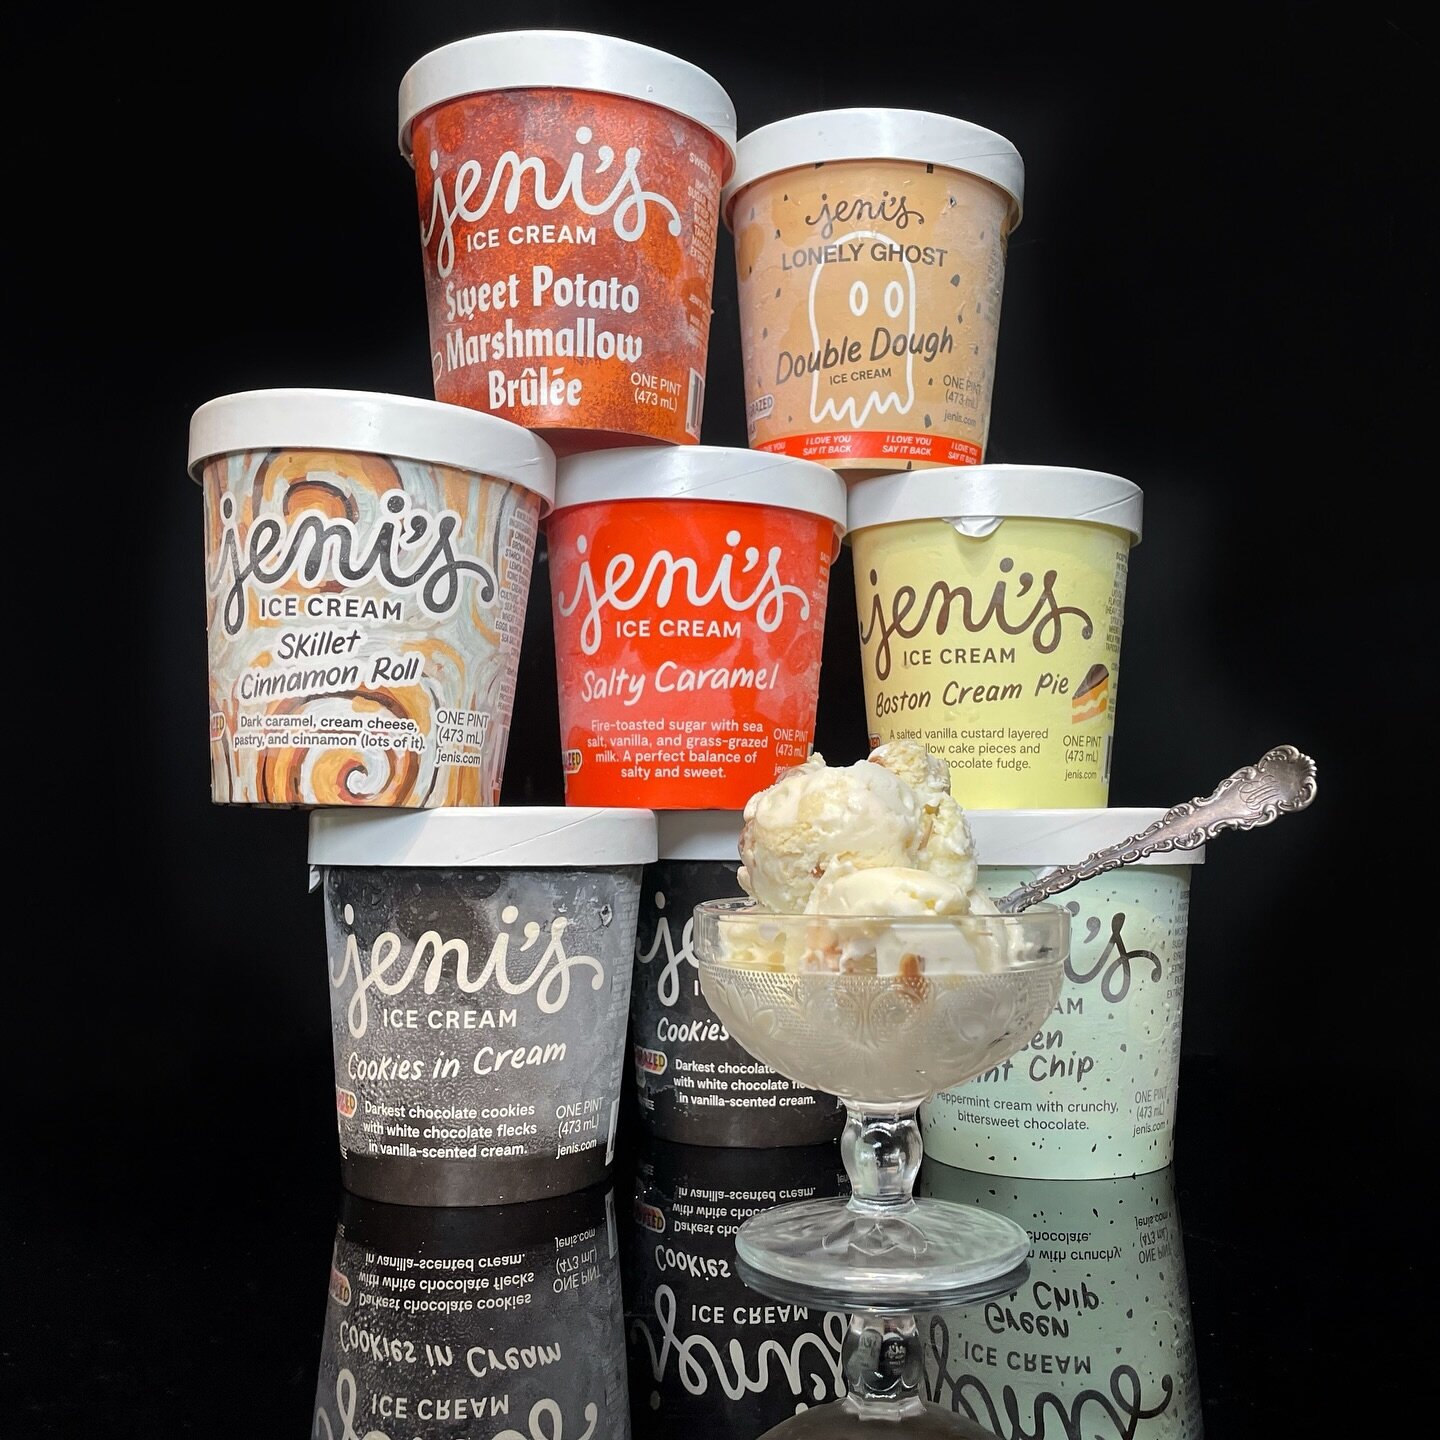 @jenisicecreams recently sent me some of their gourmet ice cream to try. I opened the box to find flavors like Sweet Potato Marshmallow Br&ucirc;l&eacute;e, Boston Cream Pie, Salty Caramel, and Skillet Cinnamon Roll. Color me intrigued!  I carefully 